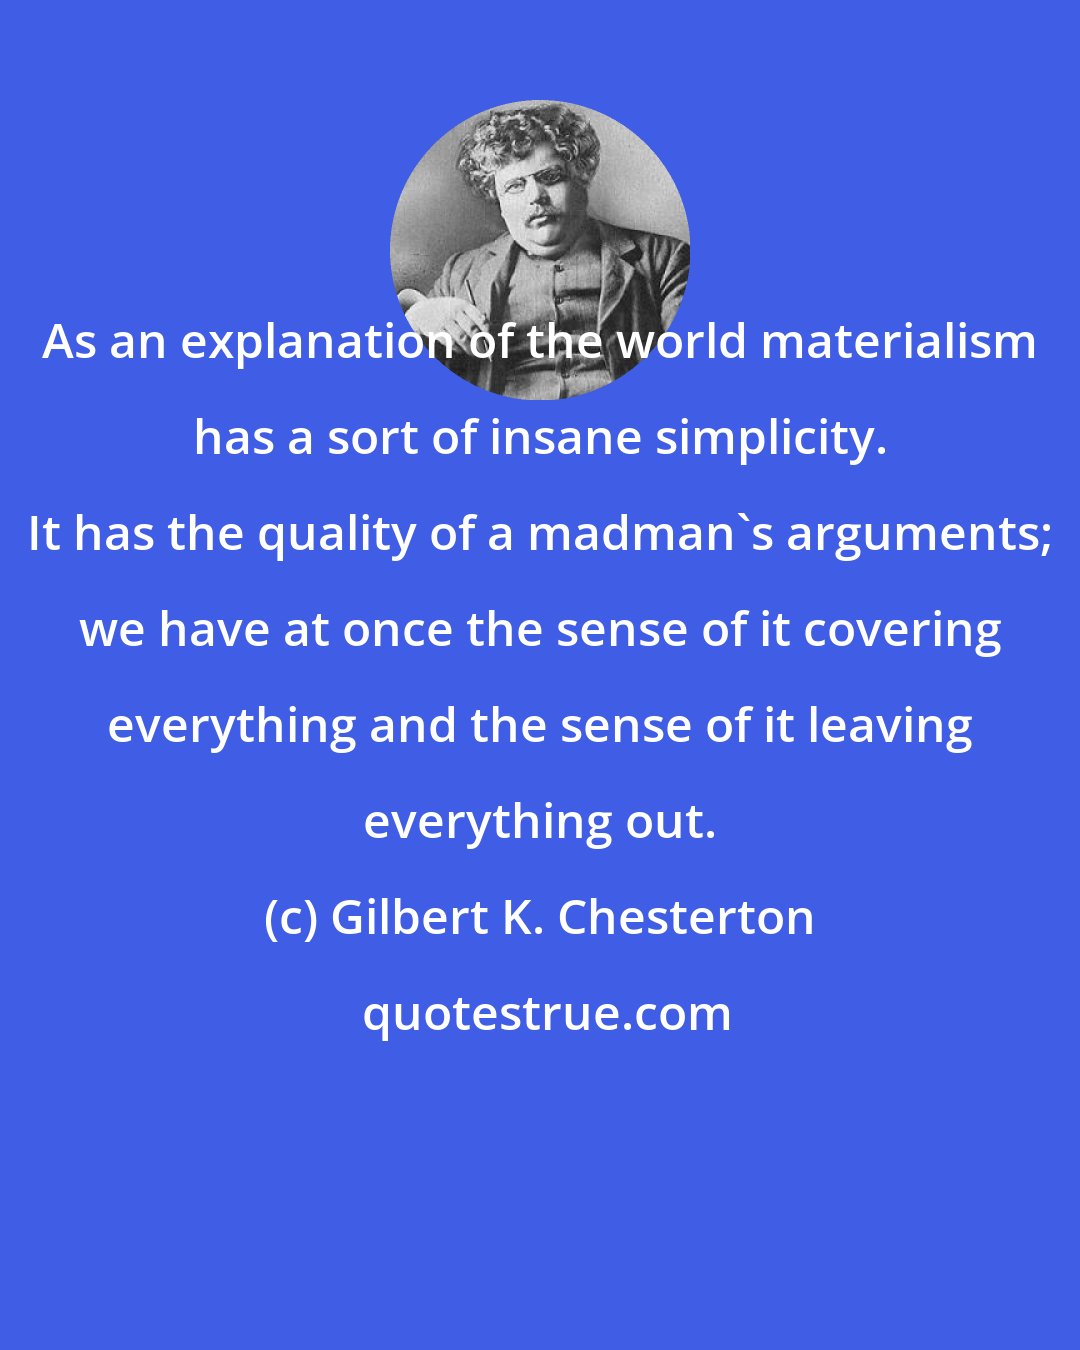 Gilbert K. Chesterton: As an explanation of the world materialism has a sort of insane simplicity. It has the quality of a madman's arguments; we have at once the sense of it covering everything and the sense of it leaving everything out.